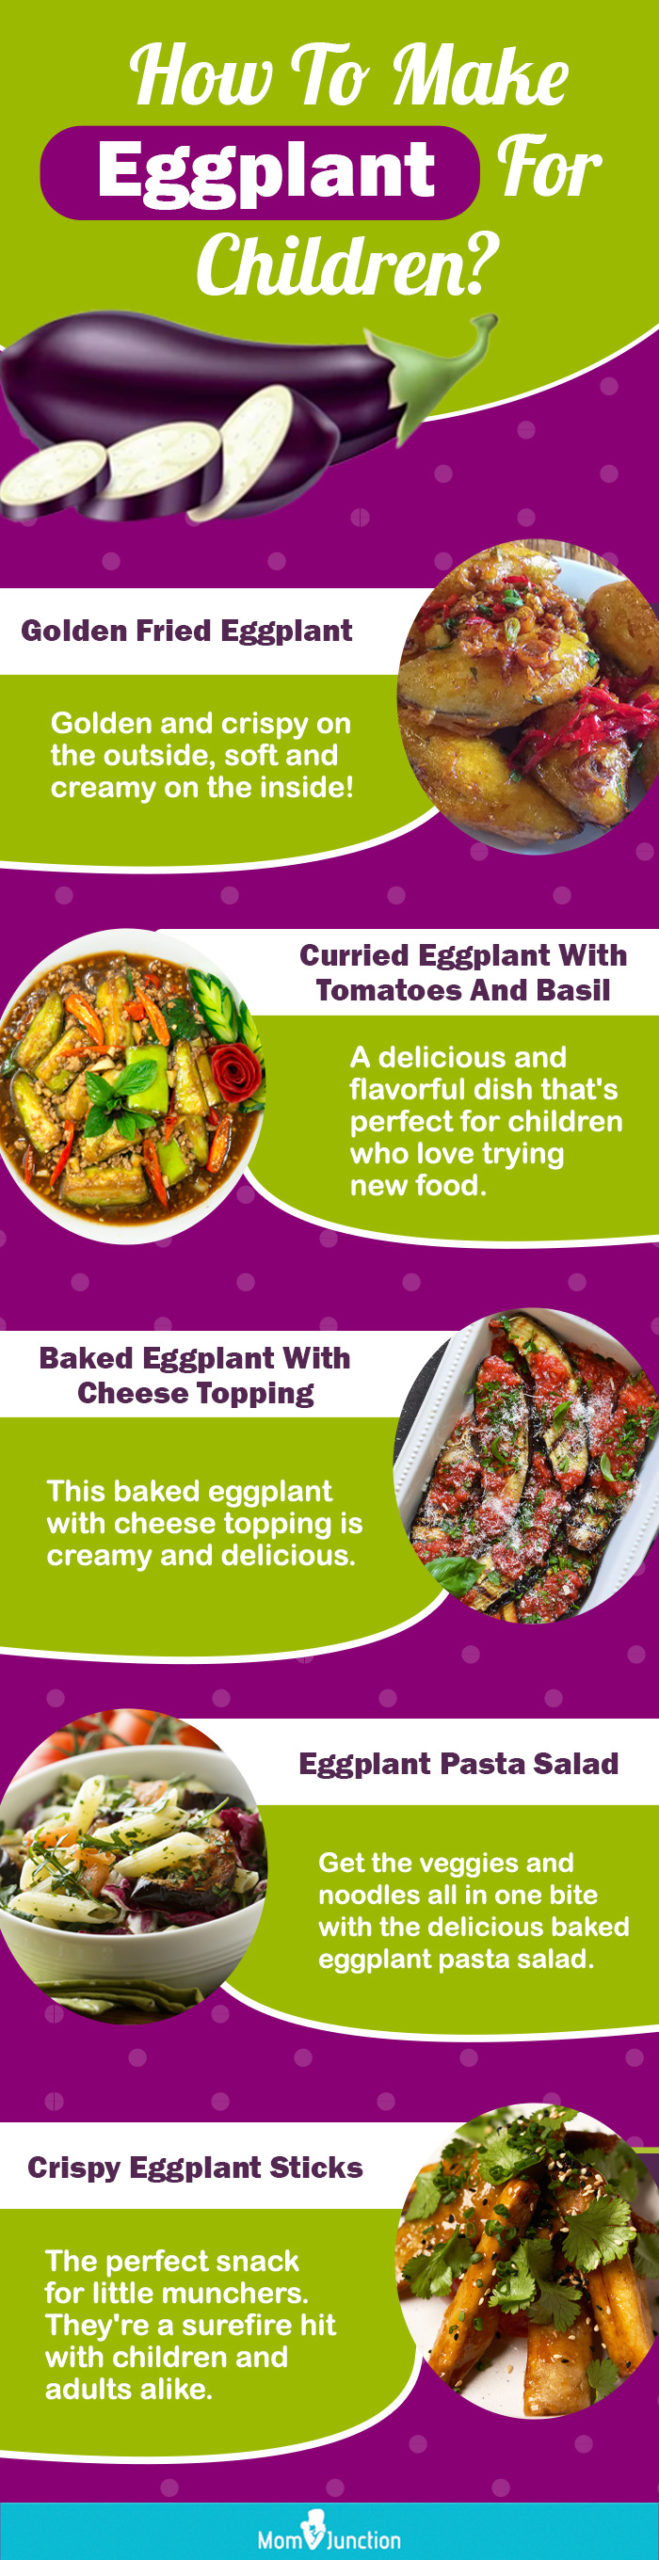 how to make eggplant for children (infographic)